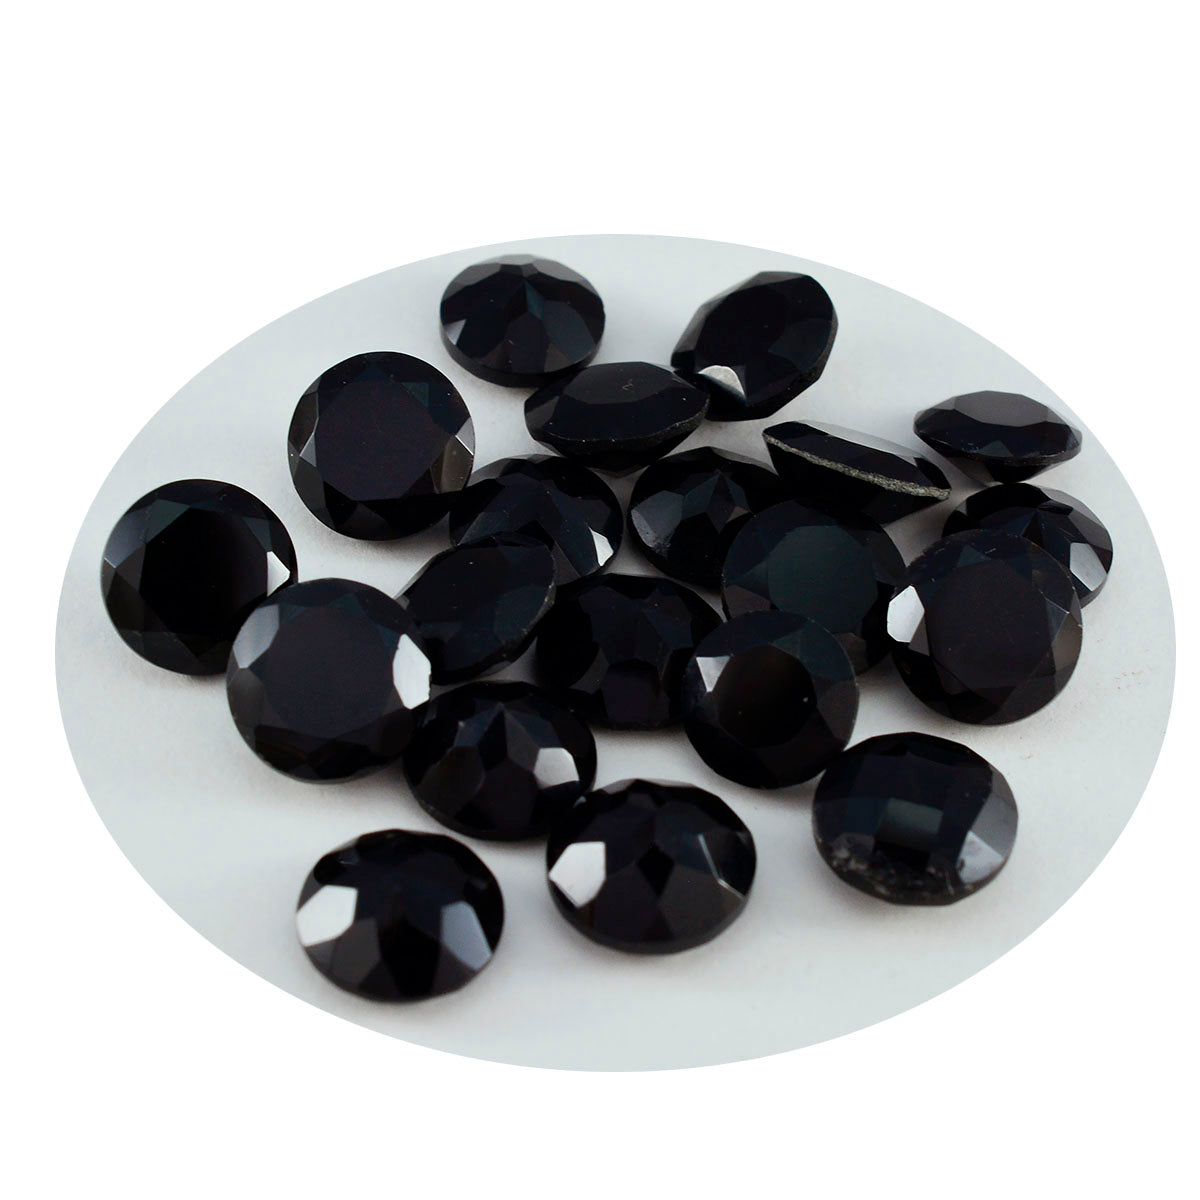 Riyogems 1PC Natural Black Onyx Faceted 7x7 mm Round Shape handsome Quality Stone